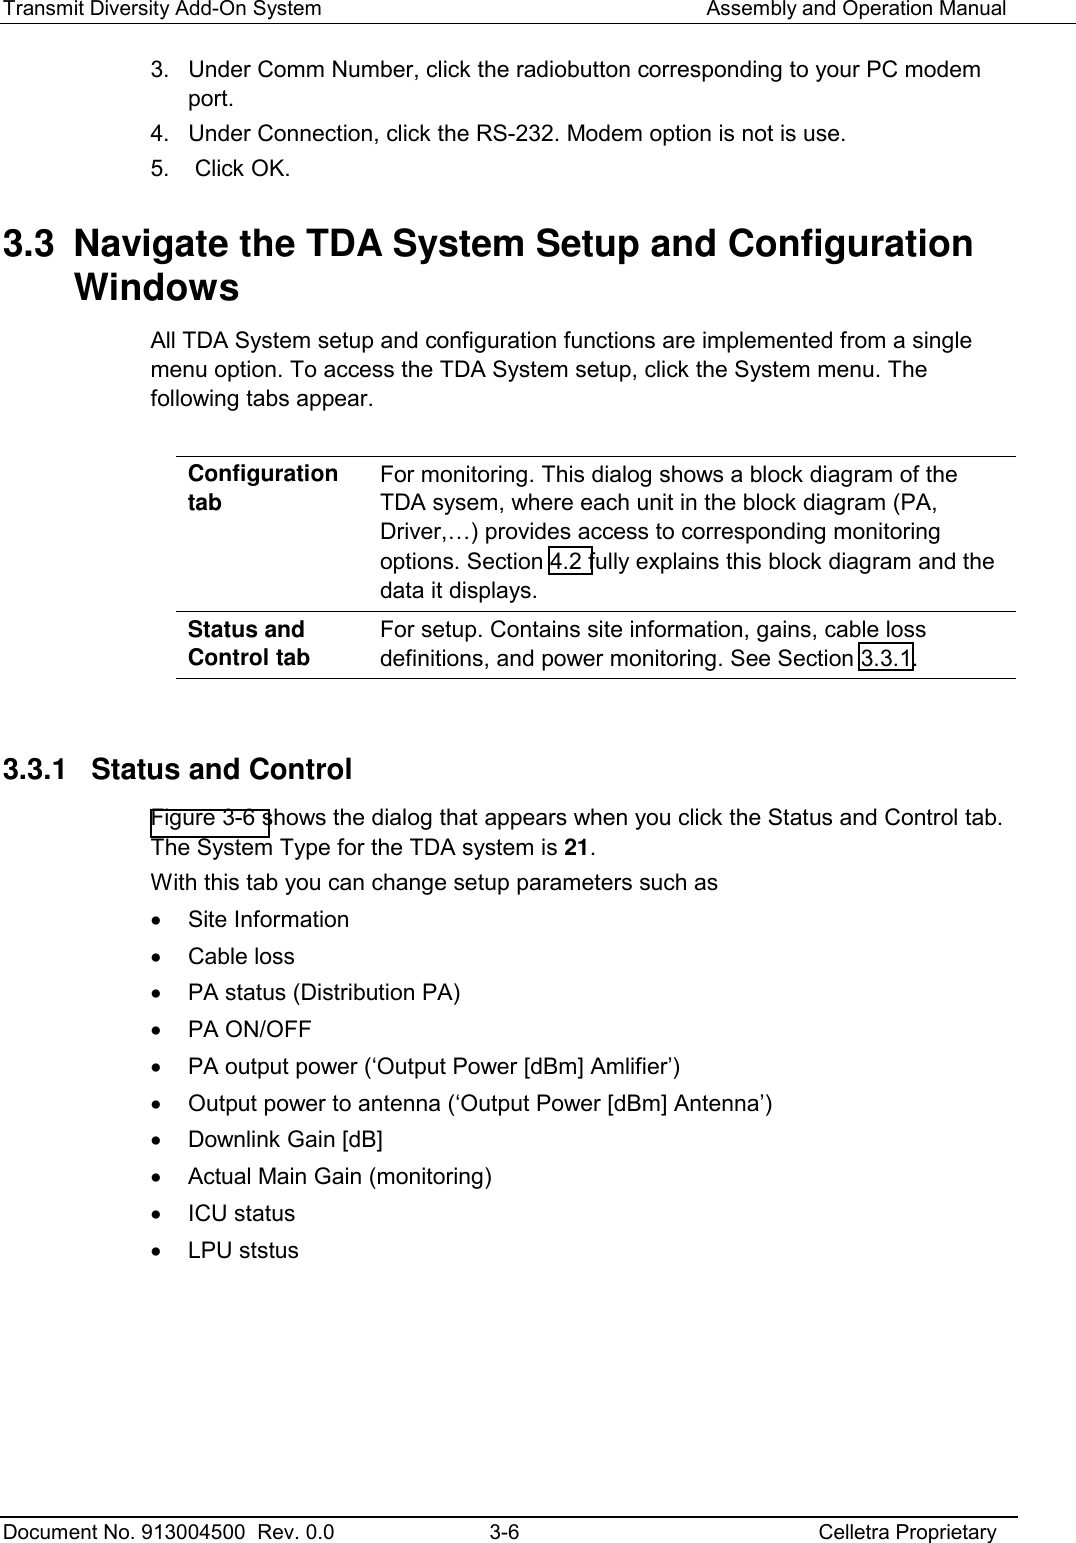 Transmit Diversity Add-On System   Assembly and Operation Manual  Document No. 913004500  Rev. 0.0  3-6  Celletra Proprietary  3.  Under Comm Number, click the radiobutton corresponding to your PC modem port. 4.  Under Connection, click the RS-232. Modem option is not is use. 5.   Click OK. 3.3  Navigate the TDA System Setup and Configuration Windows All TDA System setup and configuration functions are implemented from a single menu option. To access the TDA System setup, click the System menu. The following tabs appear.  Configuration tab For monitoring. This dialog shows a block diagram of the TDA sysem, where each unit in the block diagram (PA, Driver,…) provides access to corresponding monitoring options. Section  4.2 fully explains this block diagram and the data it displays. Status and Control tab For setup. Contains site information, gains, cable loss definitions, and power monitoring. See Section  3.3.1.  3.3.1  Status and Control  Figure  3-6 shows the dialog that appears when you click the Status and Control tab. The System Type for the TDA system is 21. With this tab you can change setup parameters such as  •  Site Information •  Cable loss  •  PA status (Distribution PA) •  PA ON/OFF  •  PA output power (‘Output Power [dBm] Amlifier’) •  Output power to antenna (‘Output Power [dBm] Antenna’) •  Downlink Gain [dB] •  Actual Main Gain (monitoring) •  ICU status • LPU ststus  